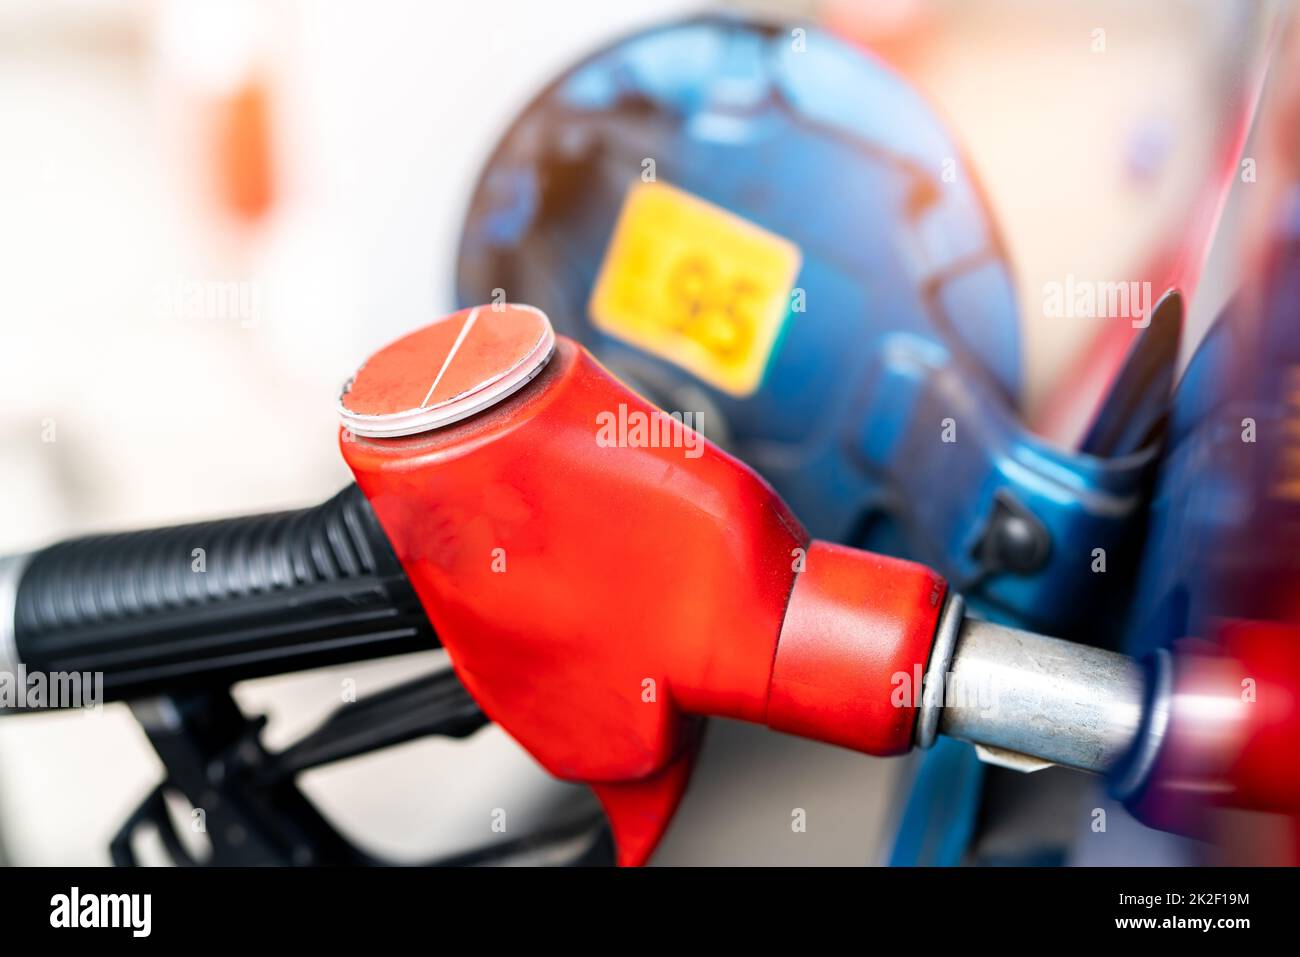 Close-up red fuel nozzle. Gasoline pump nozzle. Car fueling at gas station. Refuel fill up with petrol gasoline. Petrol pump filling fuel nozzle in fuel tank of car at gas station. Oil price crisis. Stock Photo